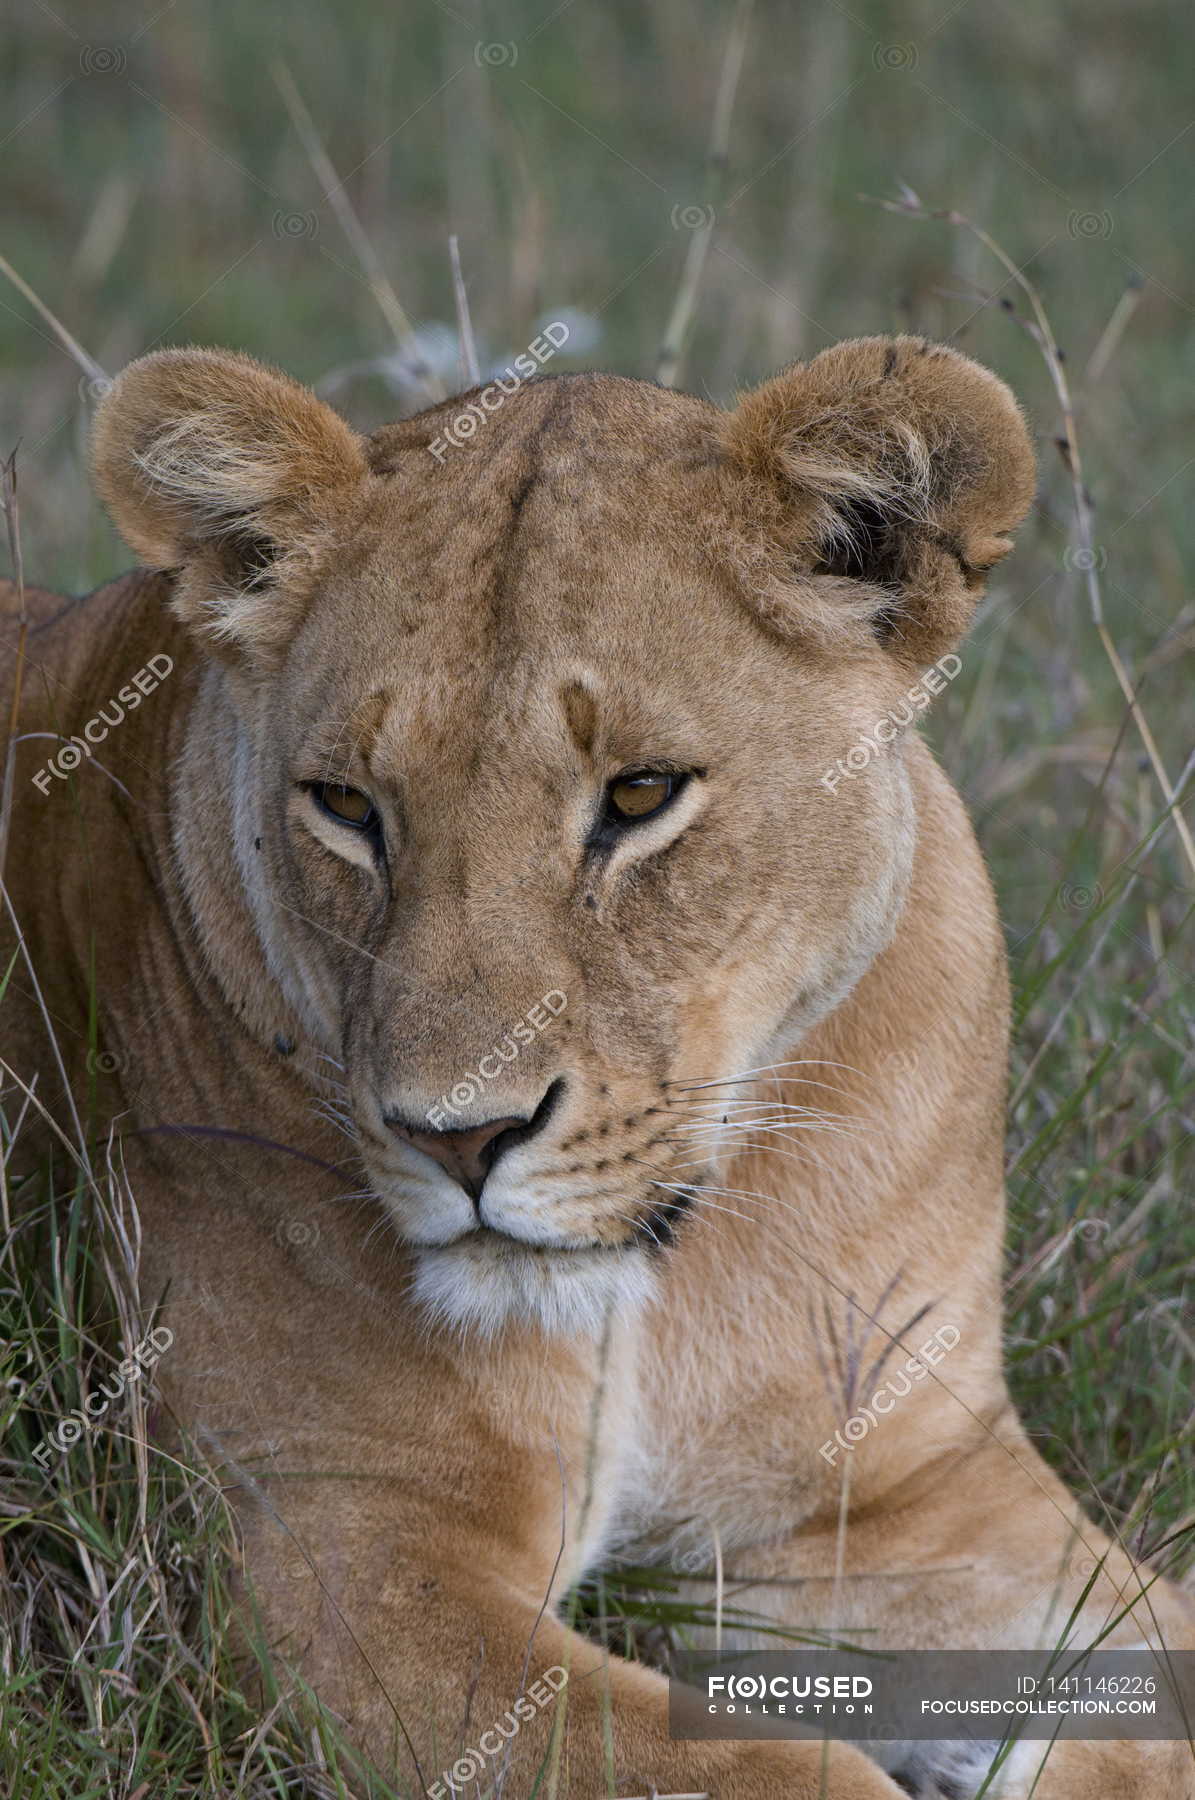 Lioness lying on ground — Stock Photo | #141146226